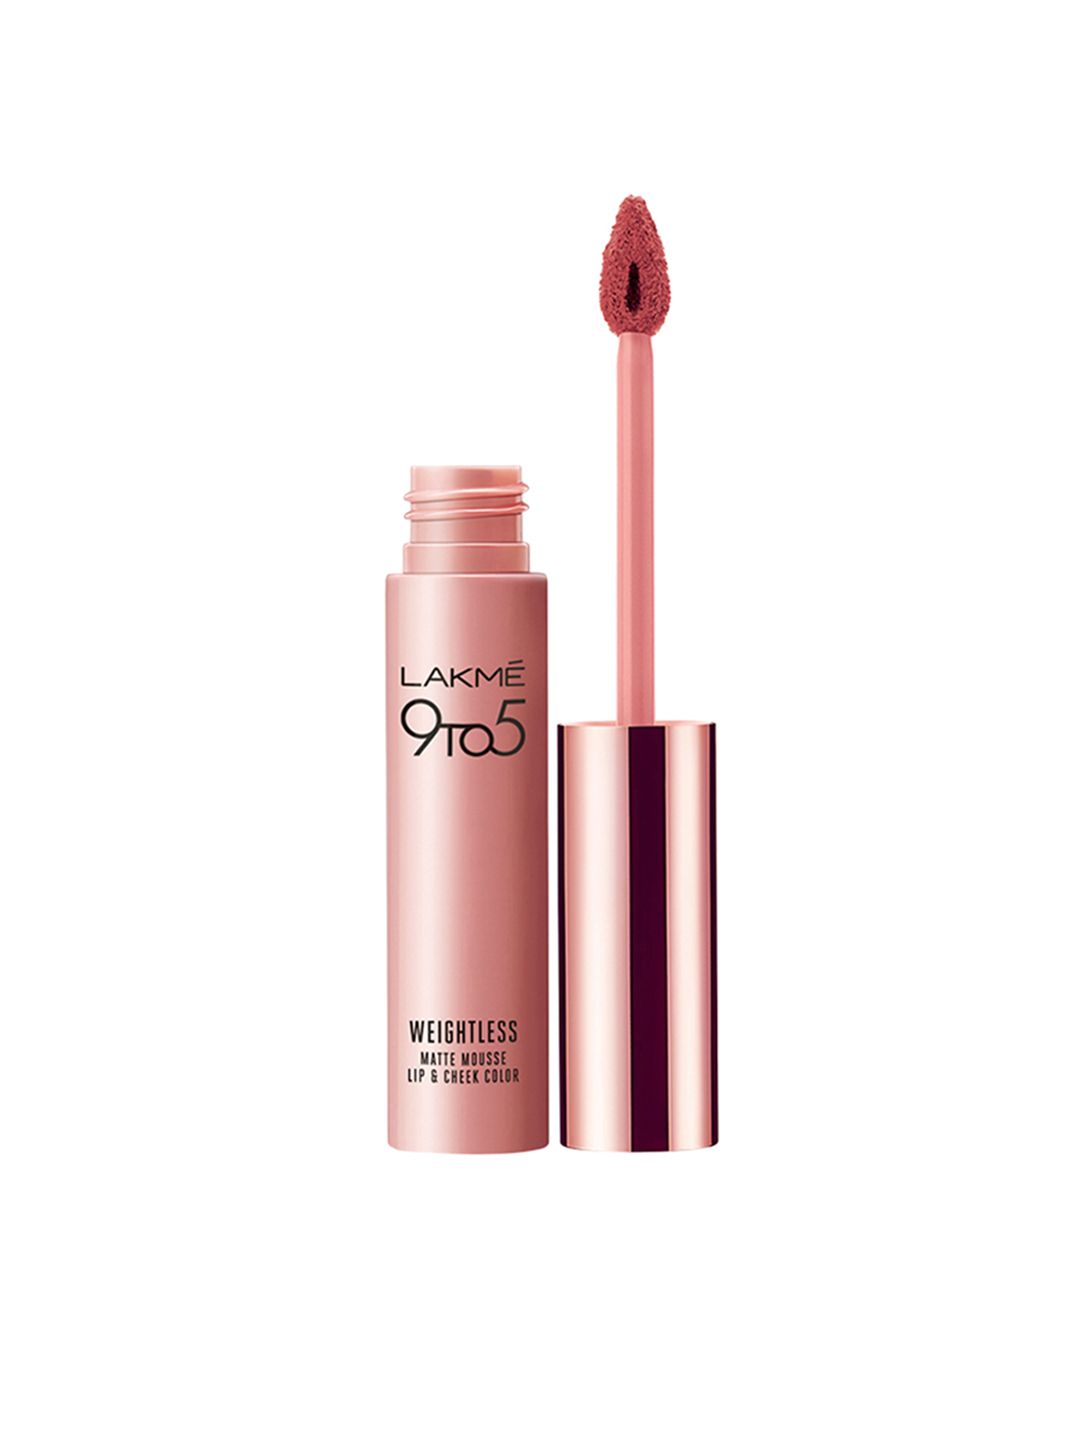 Lakme 9to5 Weightless Mousse Lip & Cheek Color - Nude Cushion Price in India